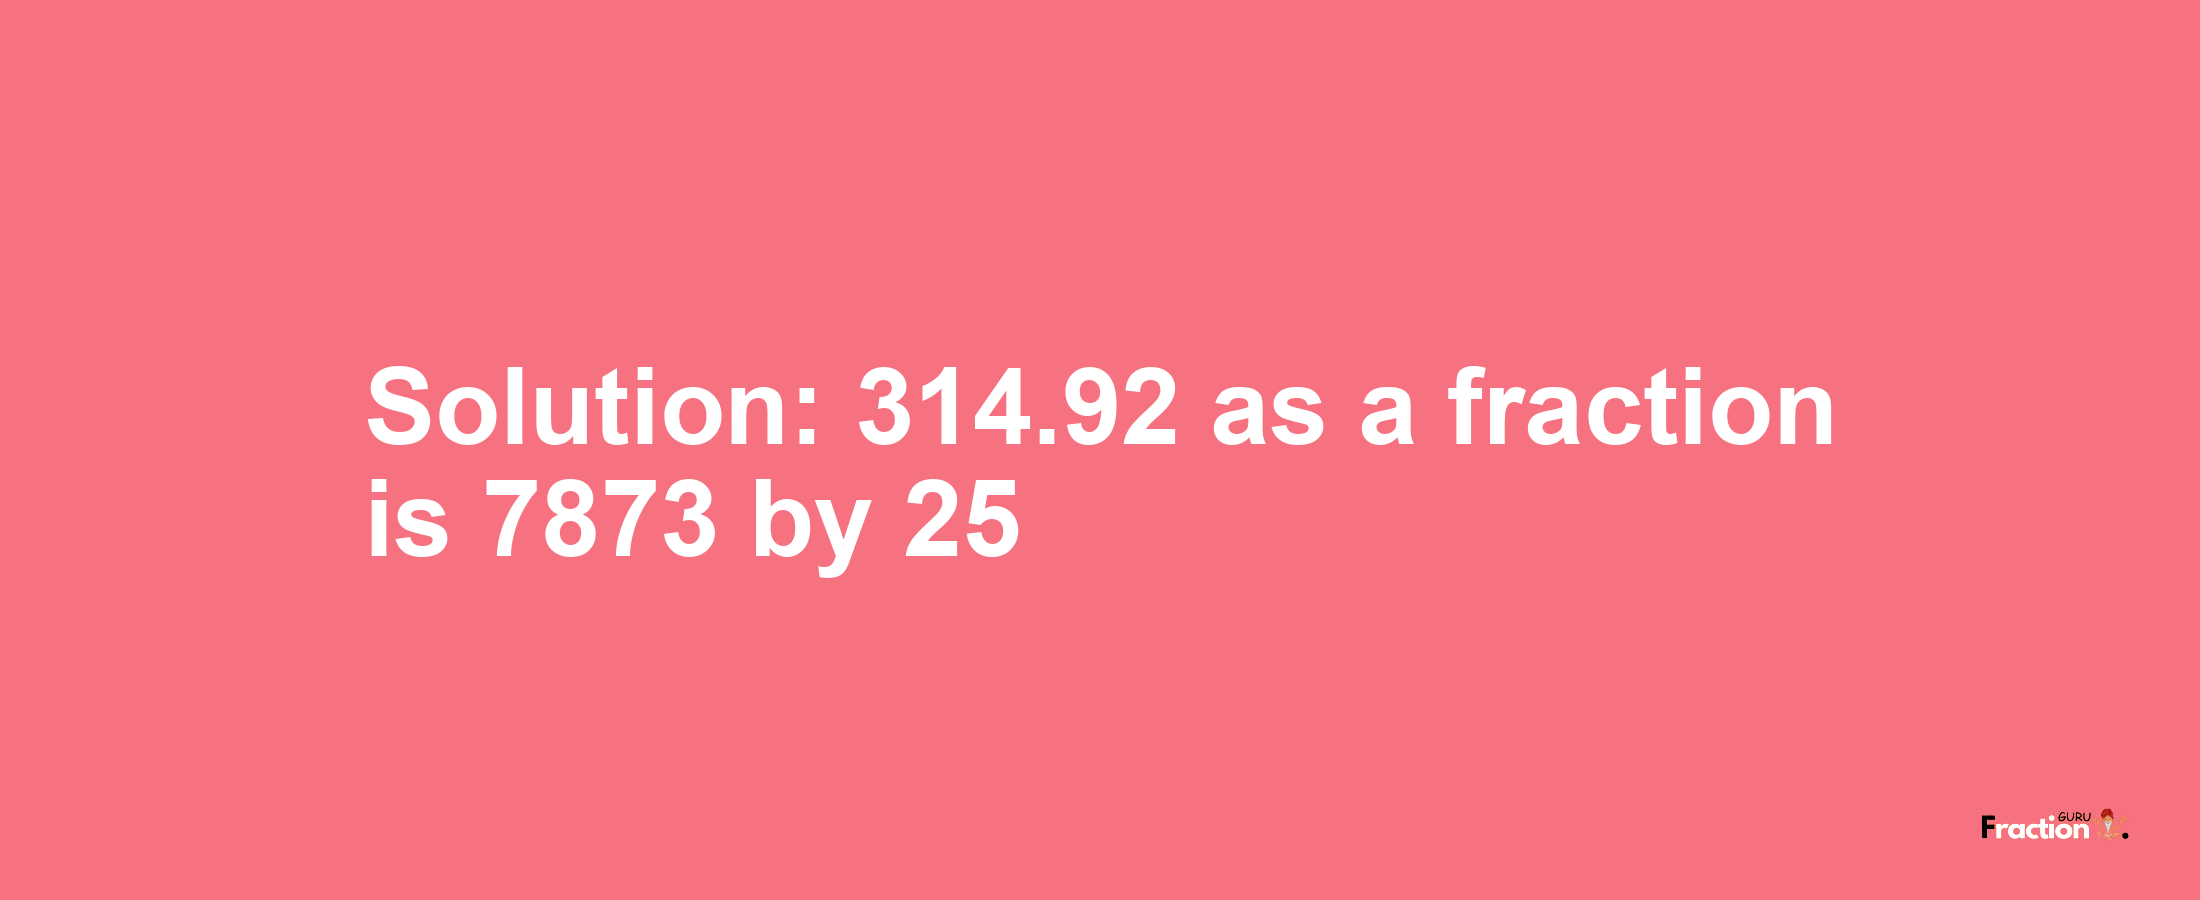 Solution:314.92 as a fraction is 7873/25